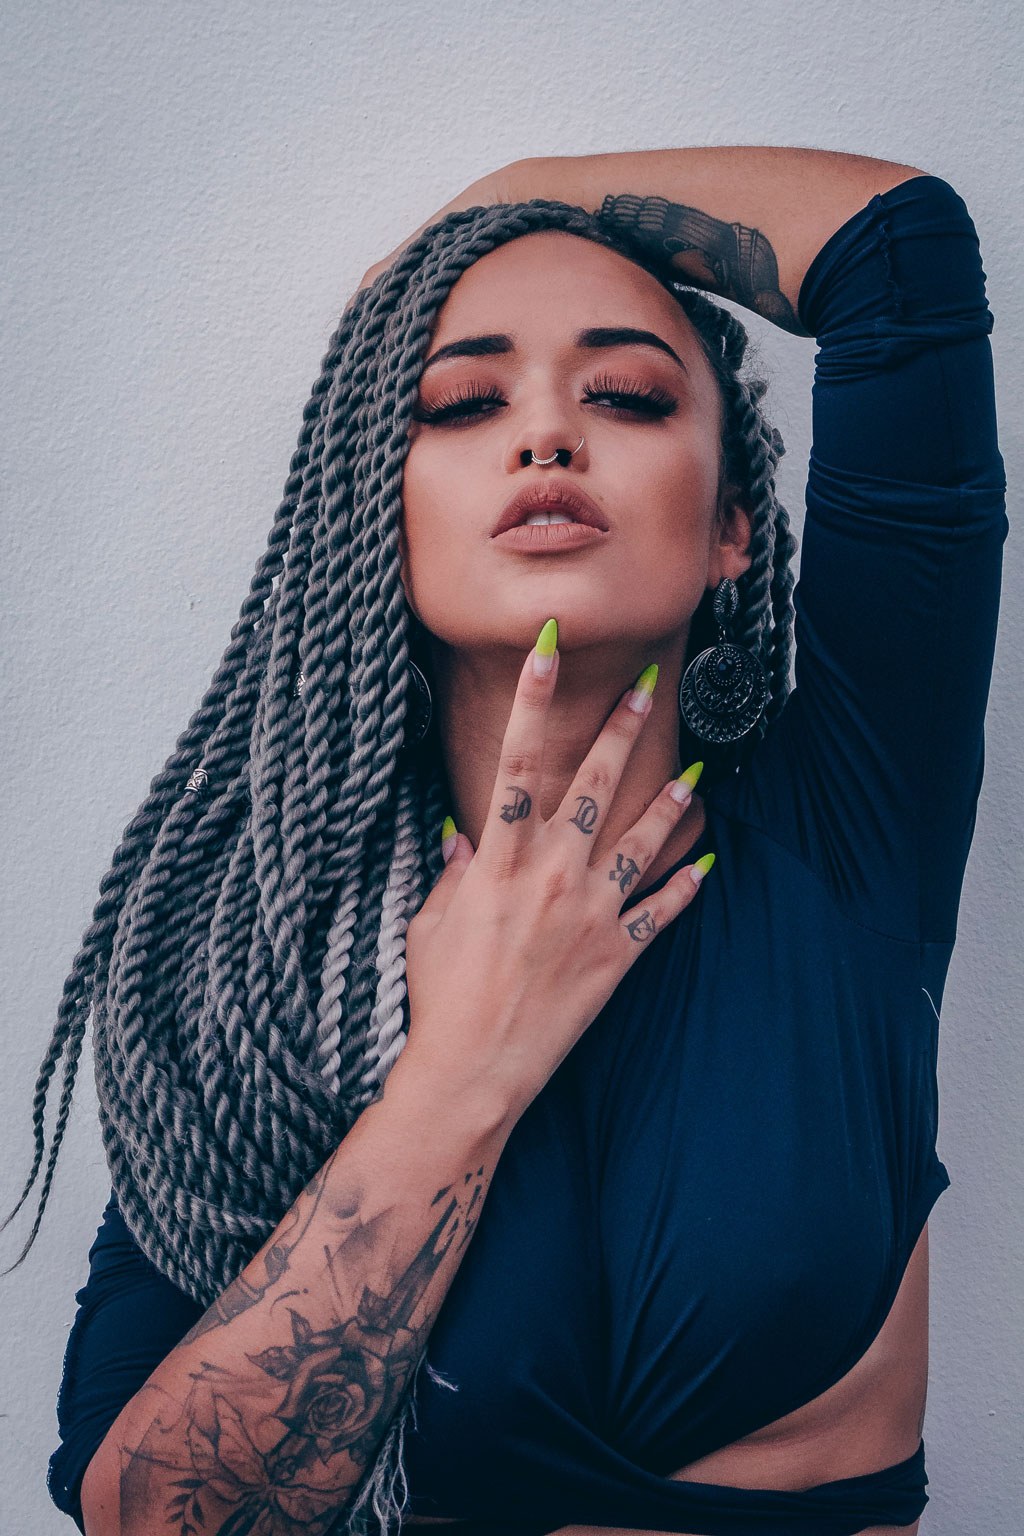 Latin woman in braids with makeup.